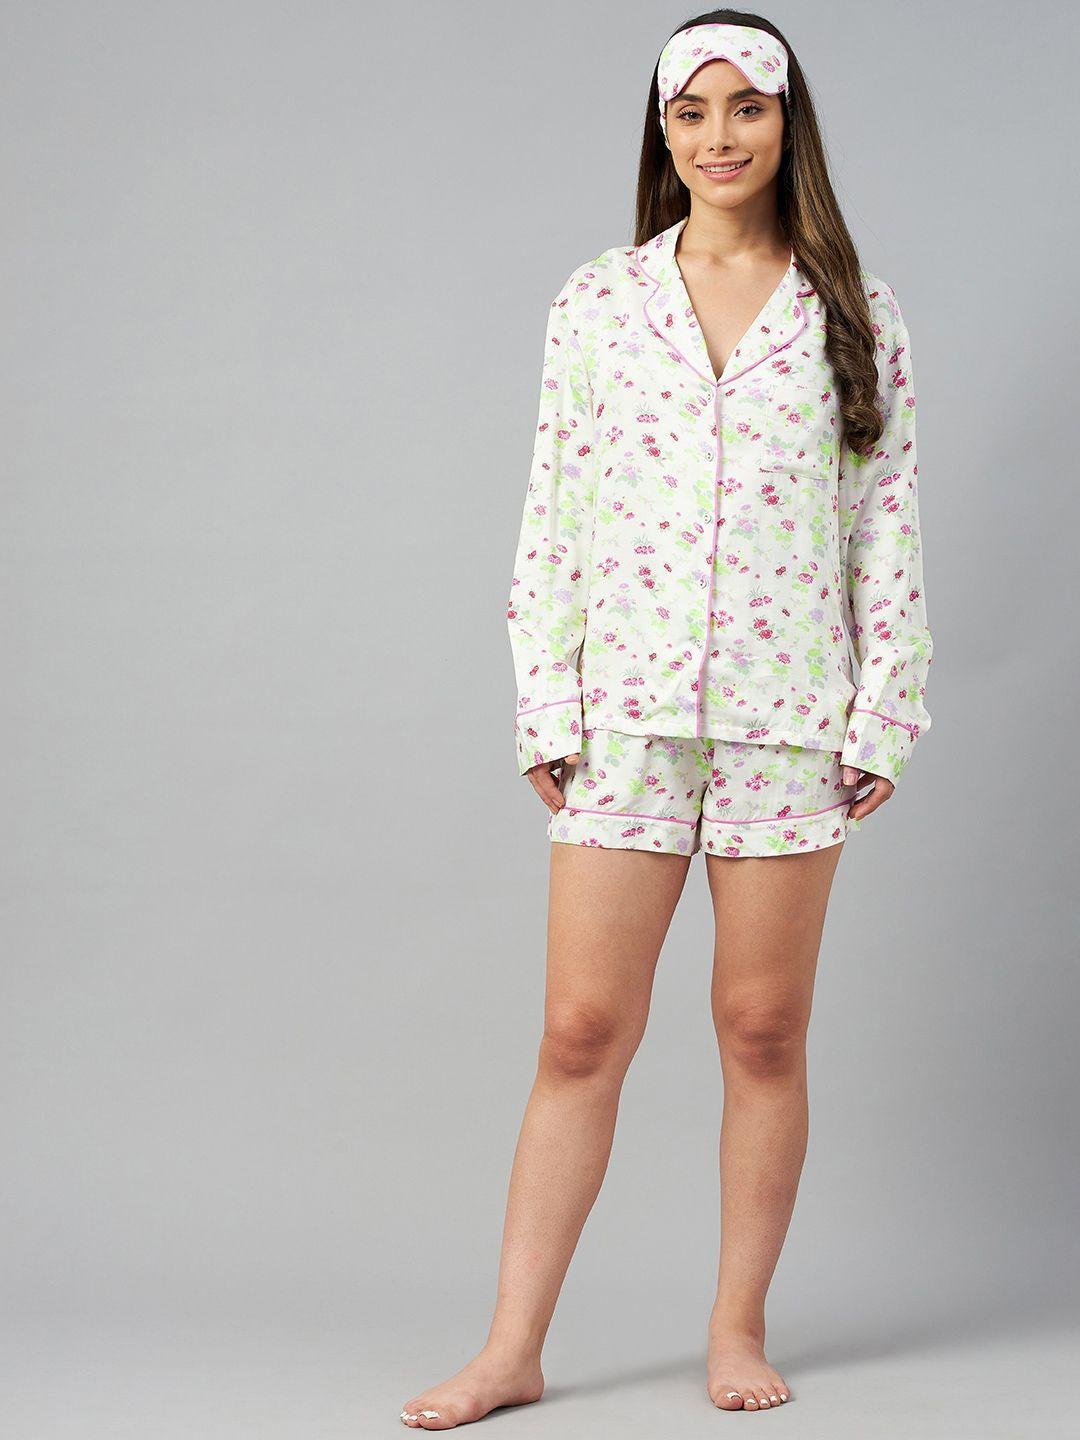 marks & spencer women off white & pink printed shorts set with eye mask